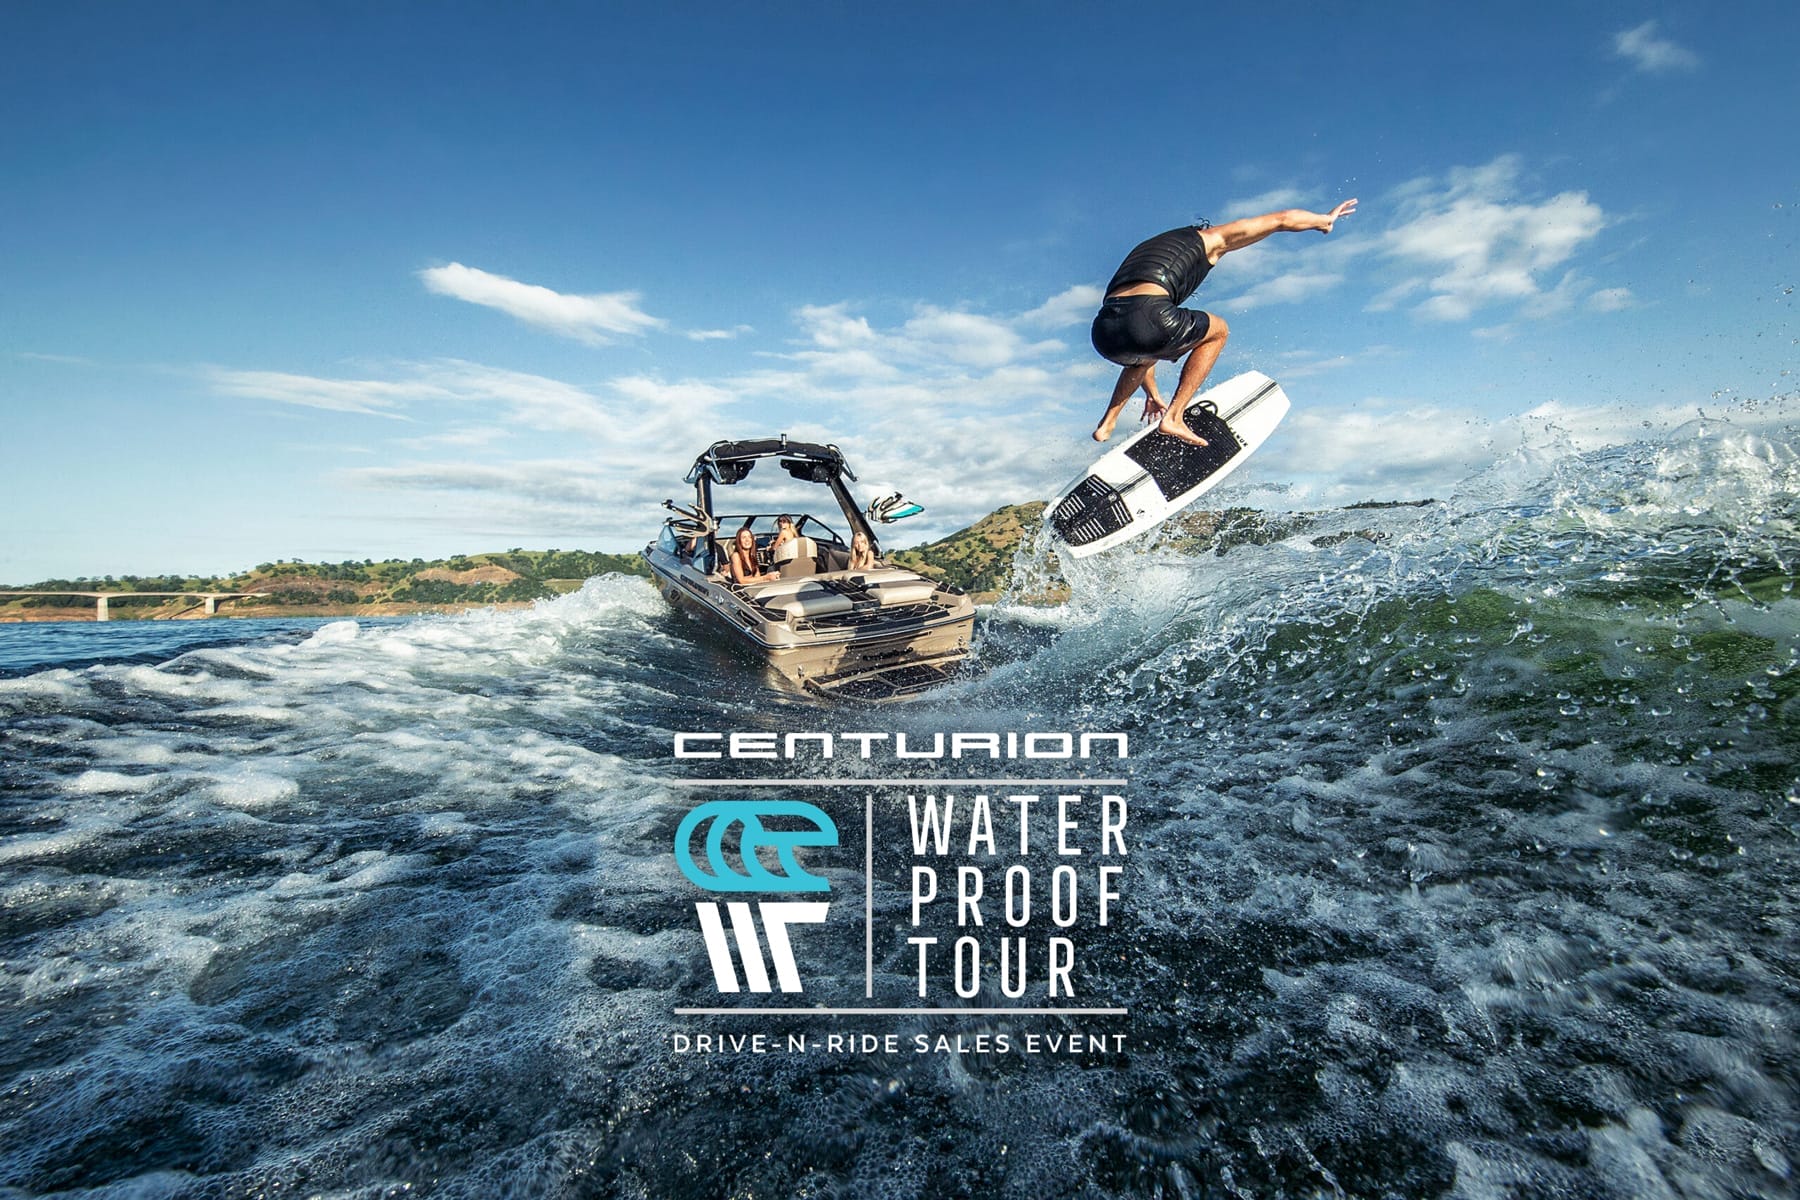 A person wakeboarding with a stylized jump next to a moving boat on a sunny day, with the "centurion waterproof tour" logo displayed at the bottom.